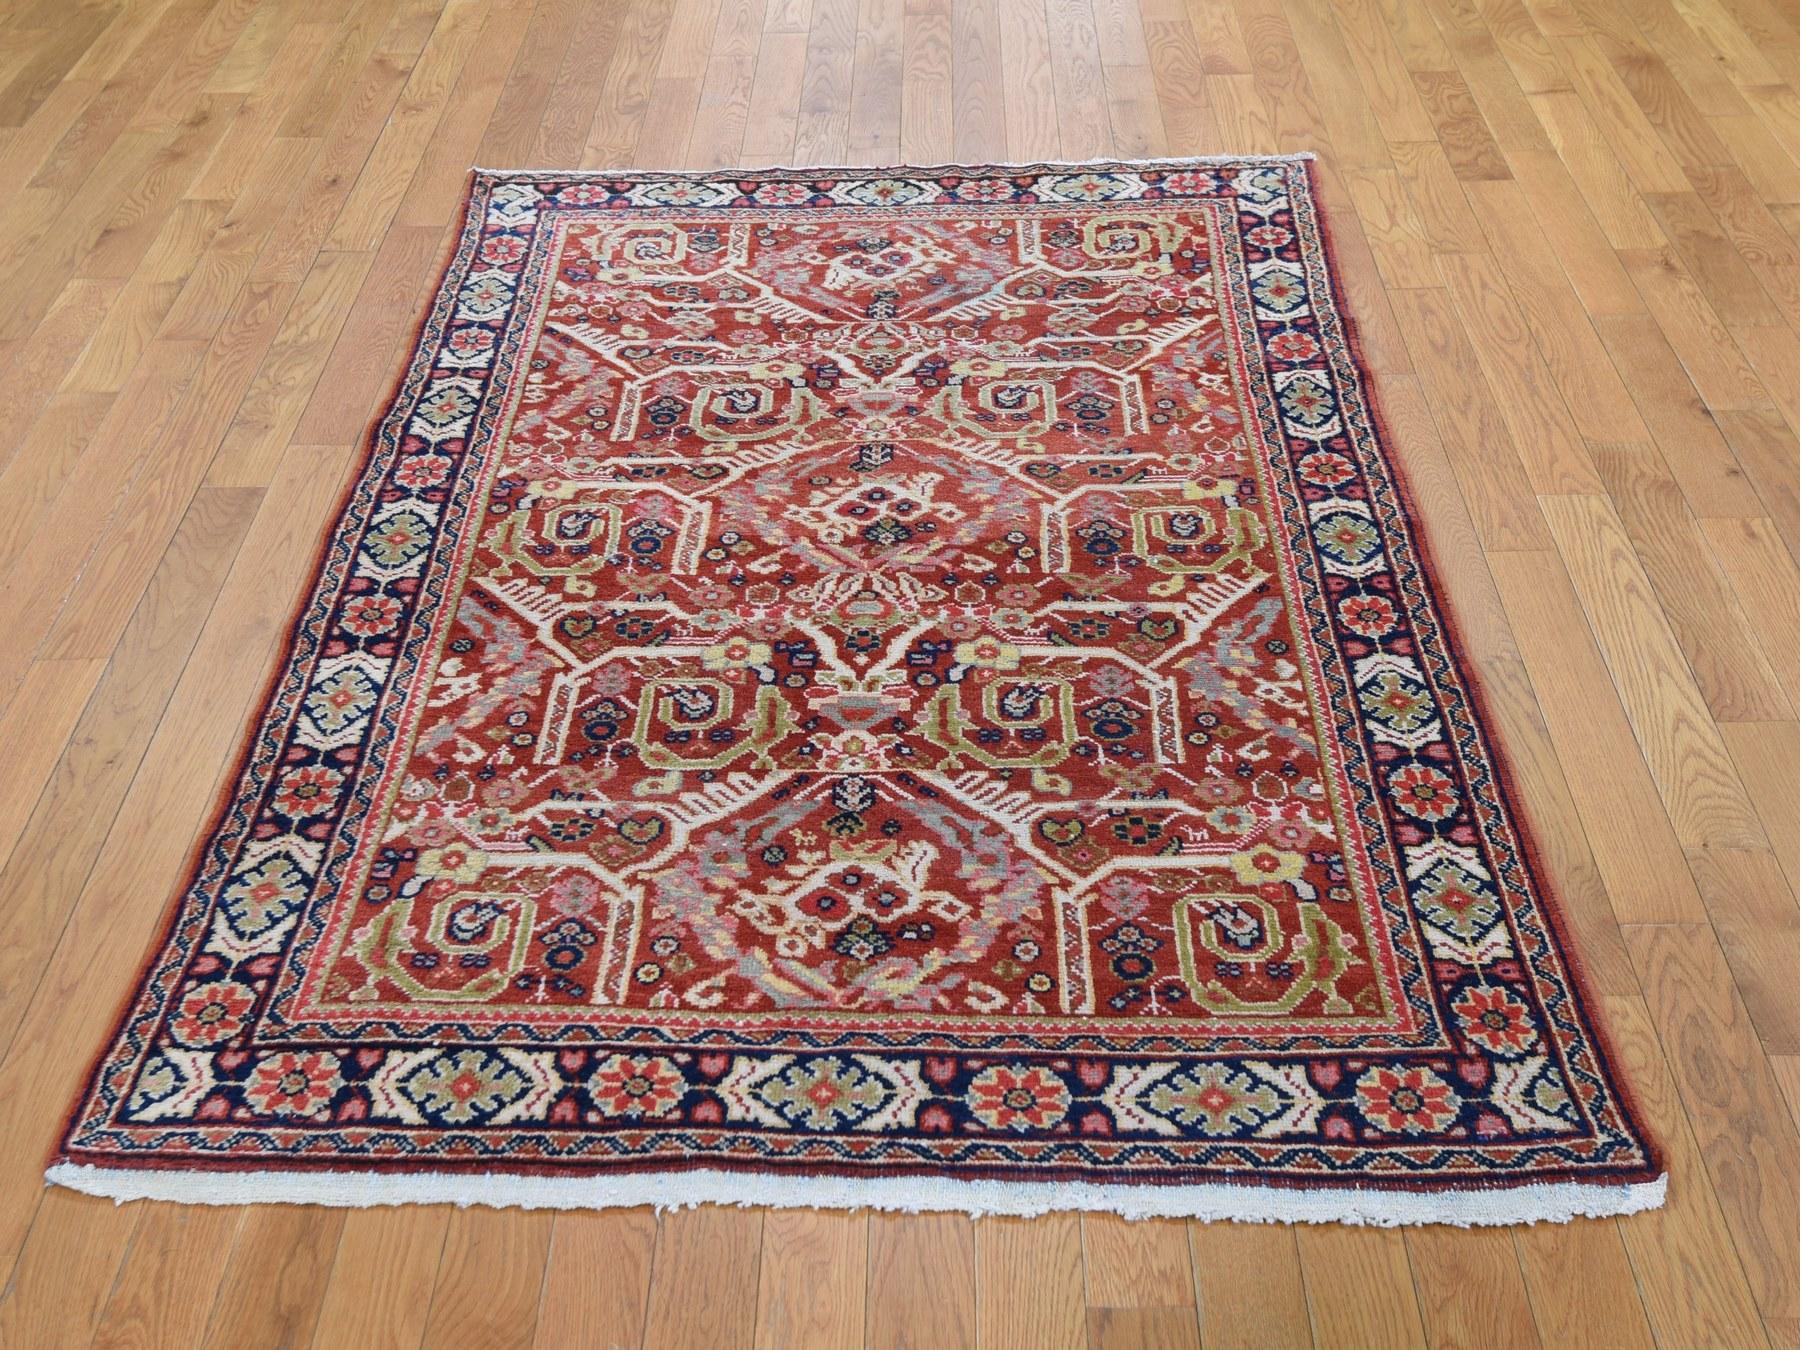 This is a truly genuine one-of-a-kind red antique Persian Mahal excellent condition hand knotted oriental rug. It has been knotted for months and months in the centuries-old Persian weaving craftsmanship techniques by expert artisans. 

Primary